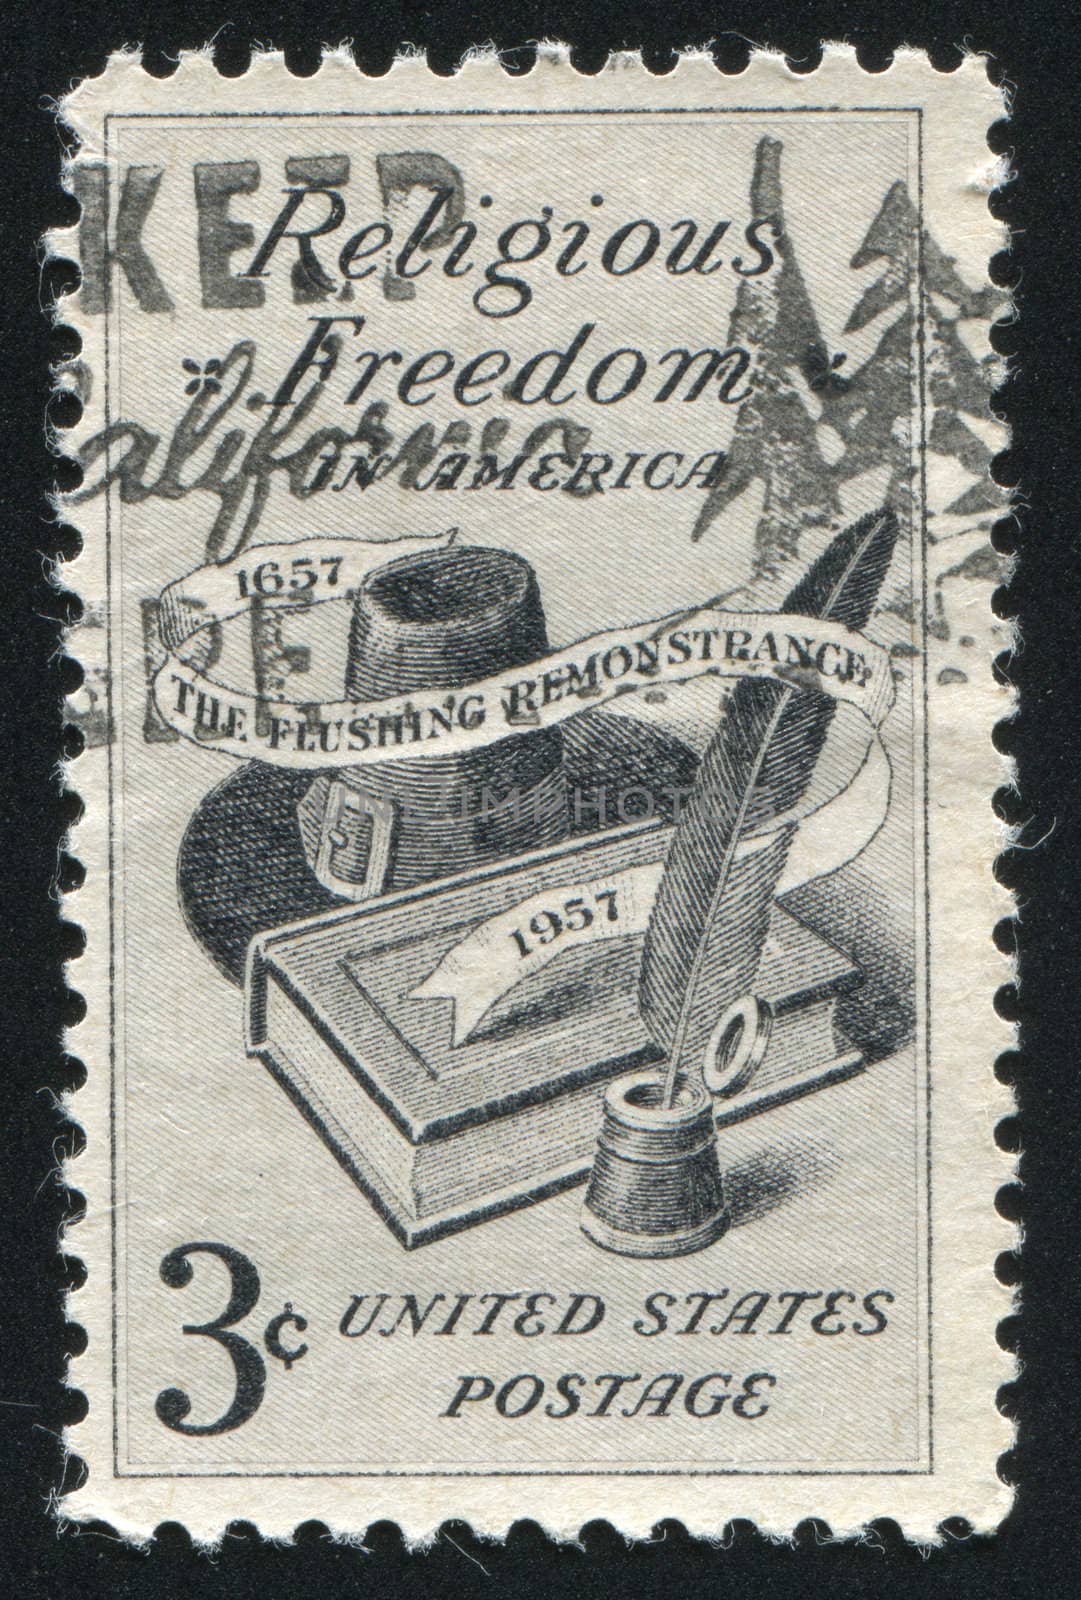 UNITED STATES - CIRCA 1957: stamp printed by United states, shows Bible, Hat and Quill Pen, circa 1957